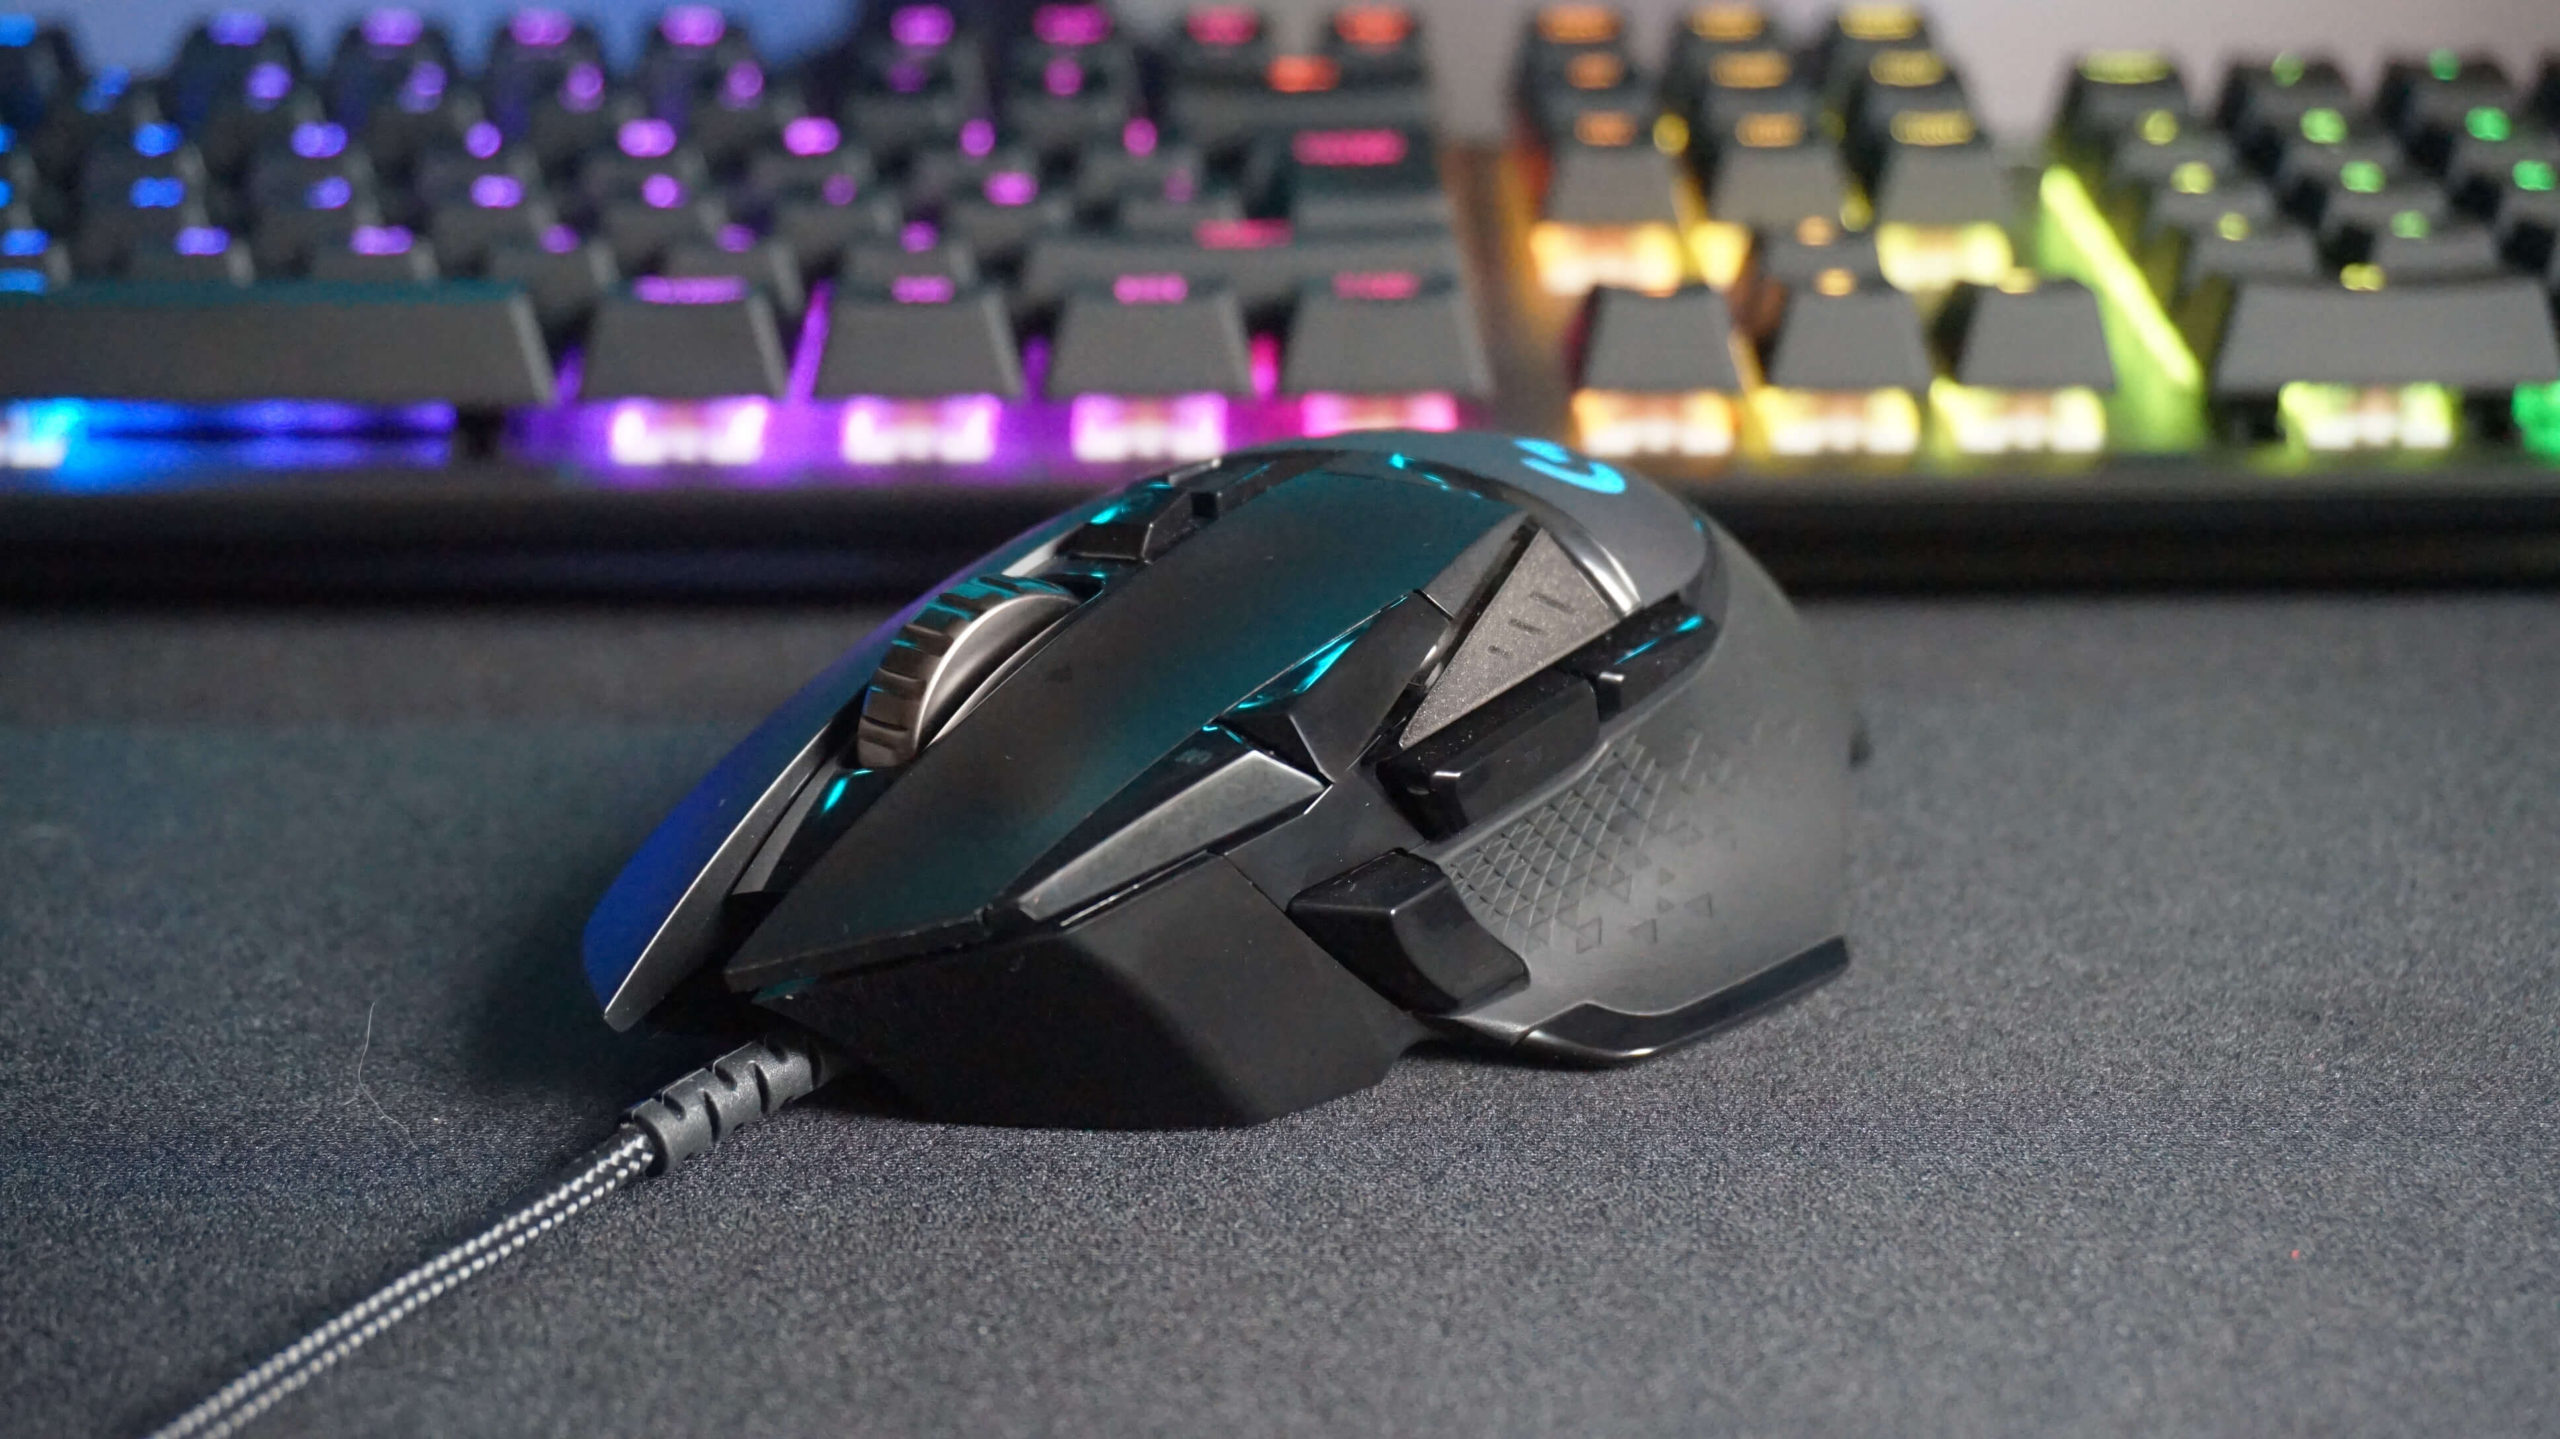 Frugtbar Kollektive At interagere Logitech G502 Lightspeed Vs G502 Hero: What is the Difference?